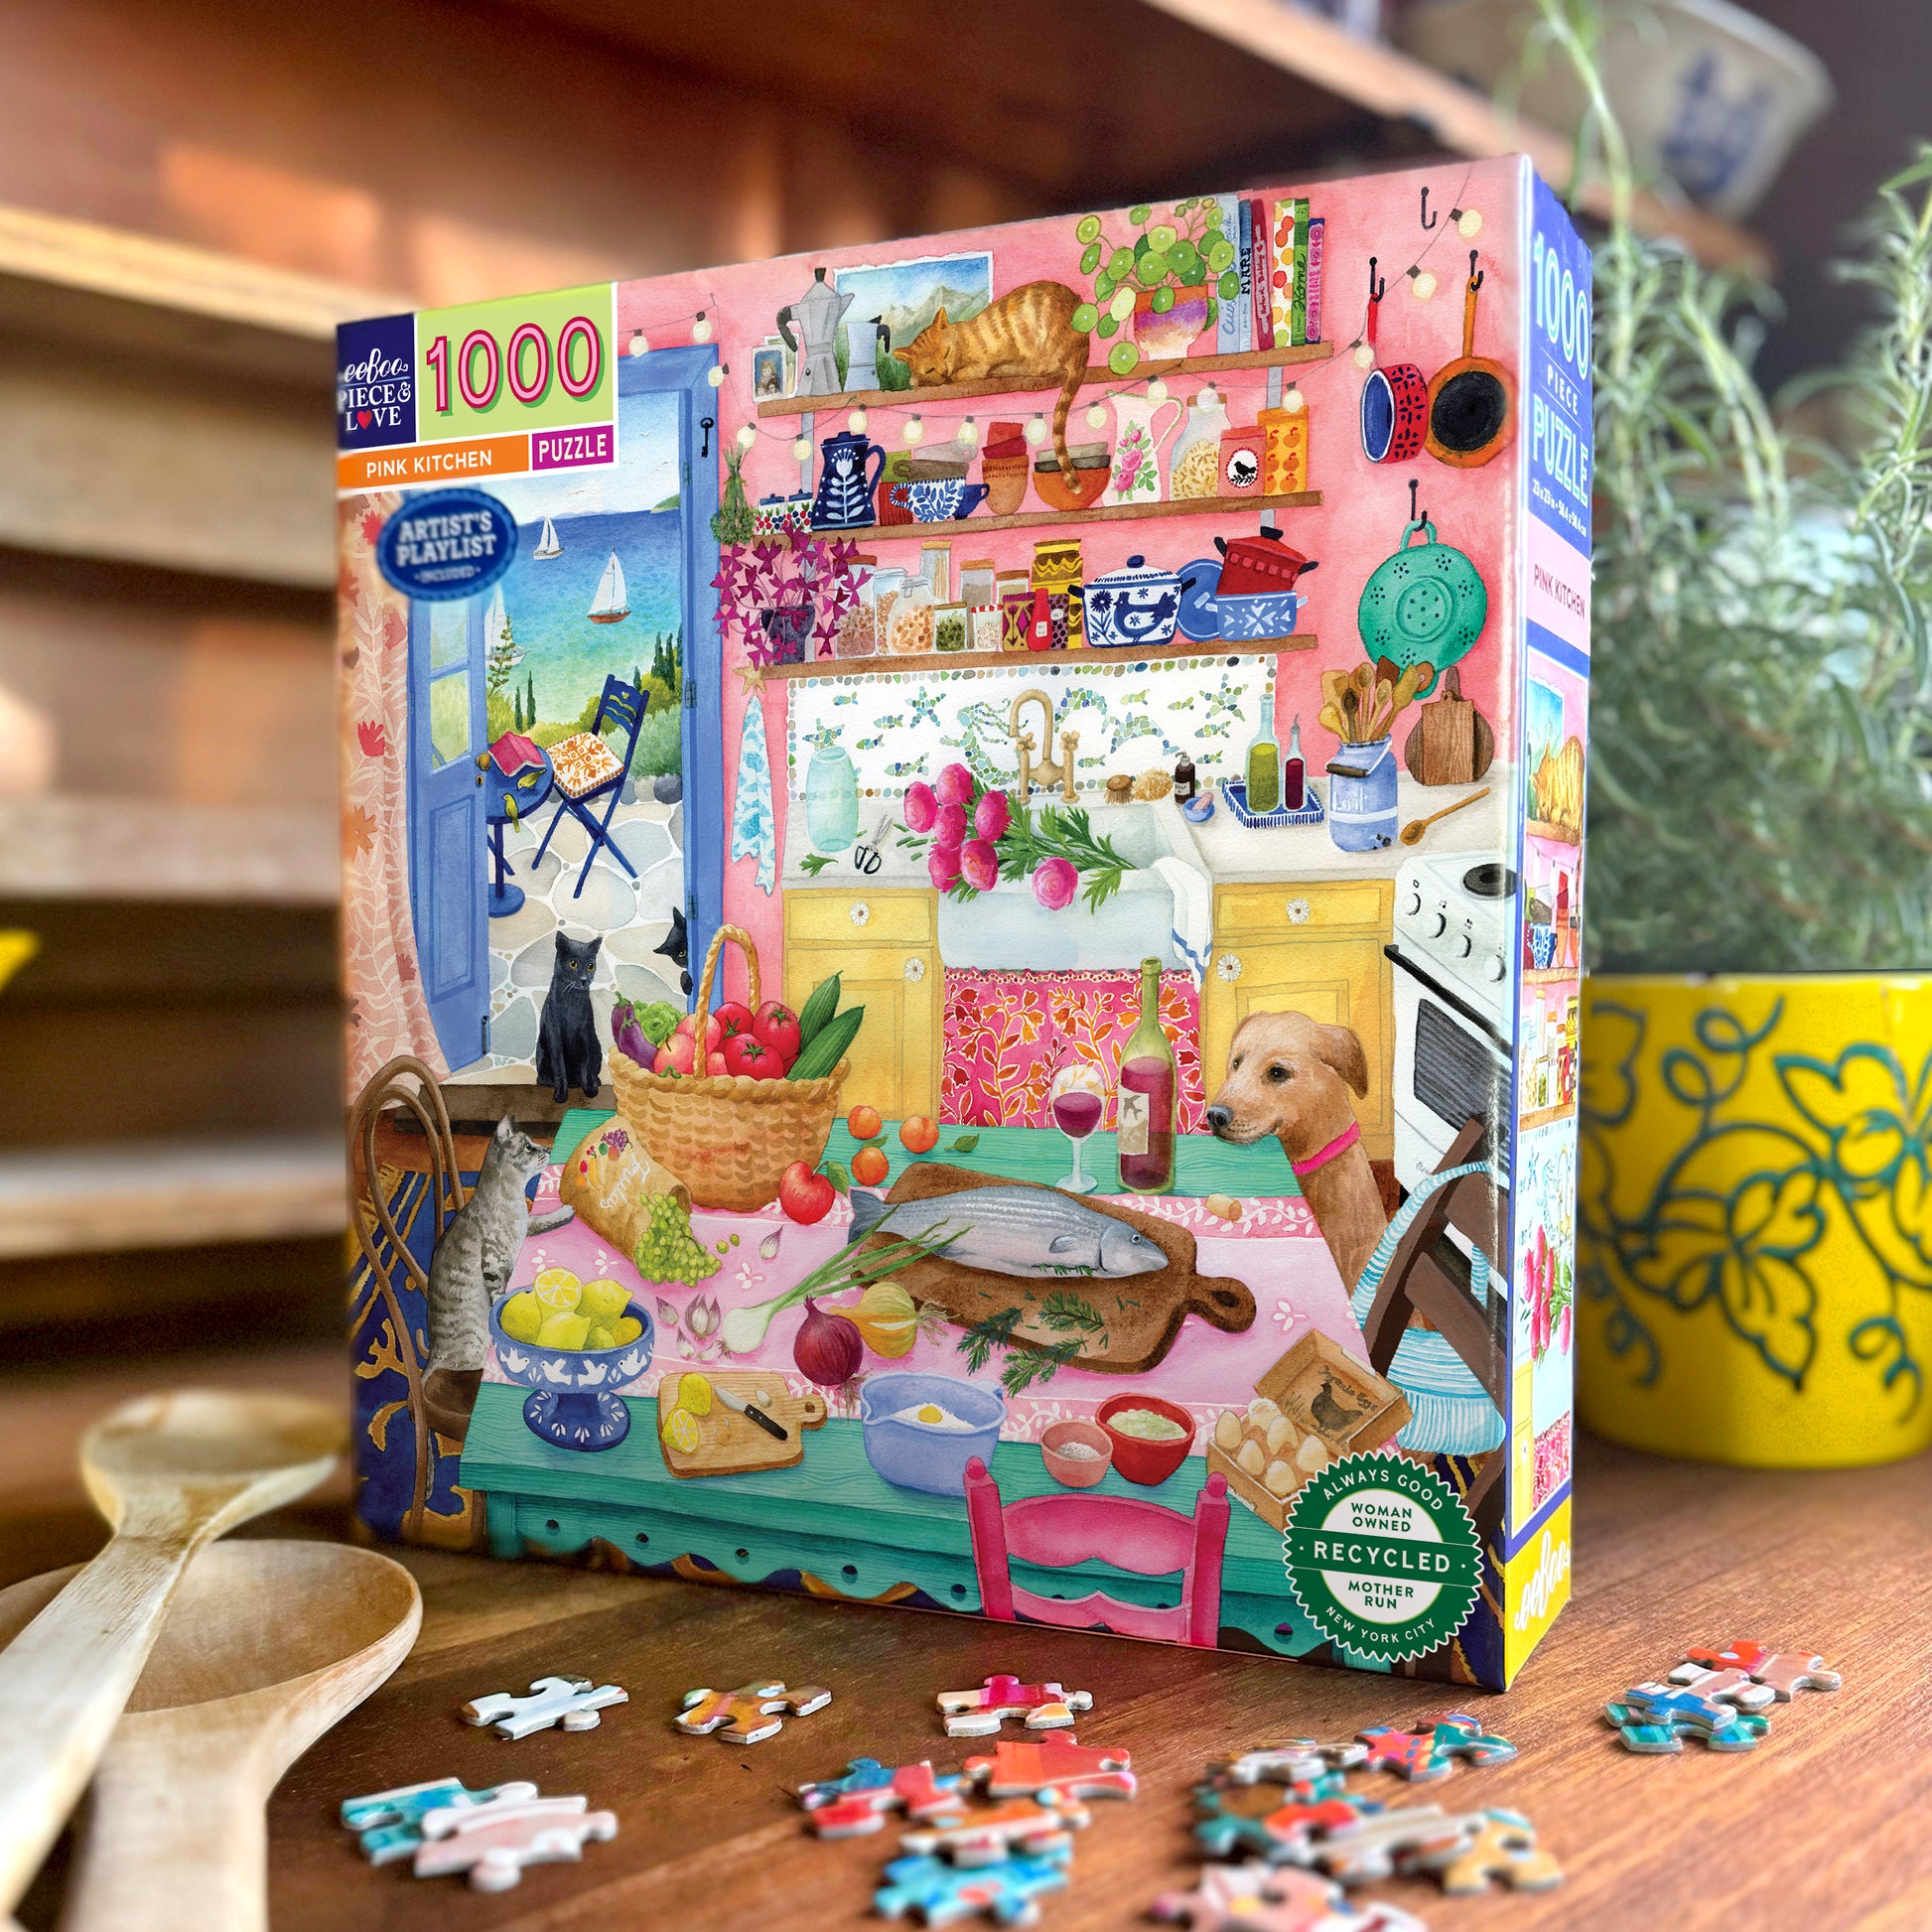 Pink Kitchen 1000 Piece Puzzle by eeBoo | Unique Beautiful Gifts